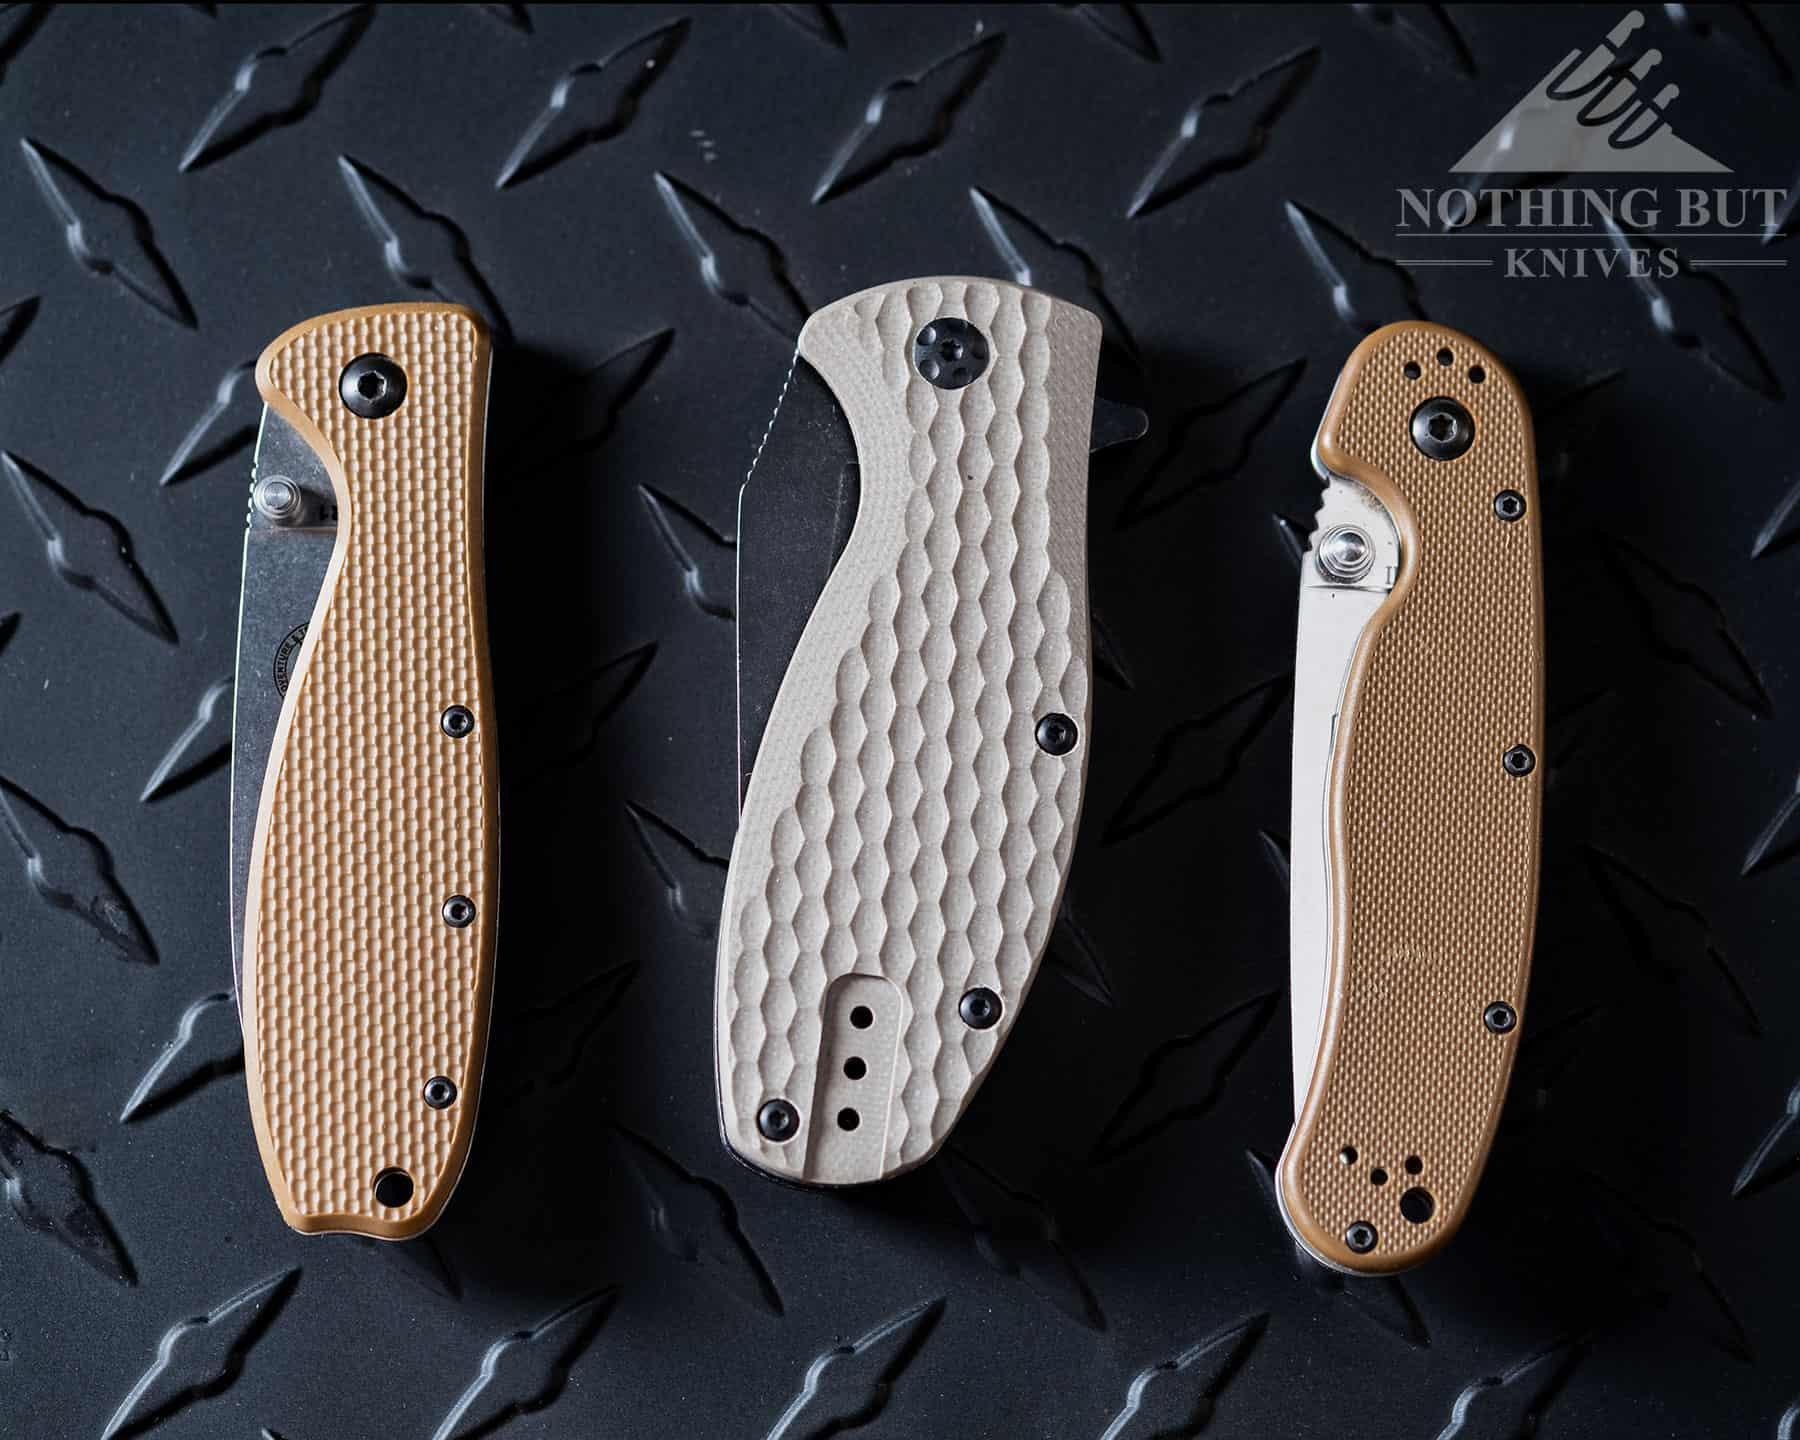 Three folding knives with textured G10 handle scales for better grip.